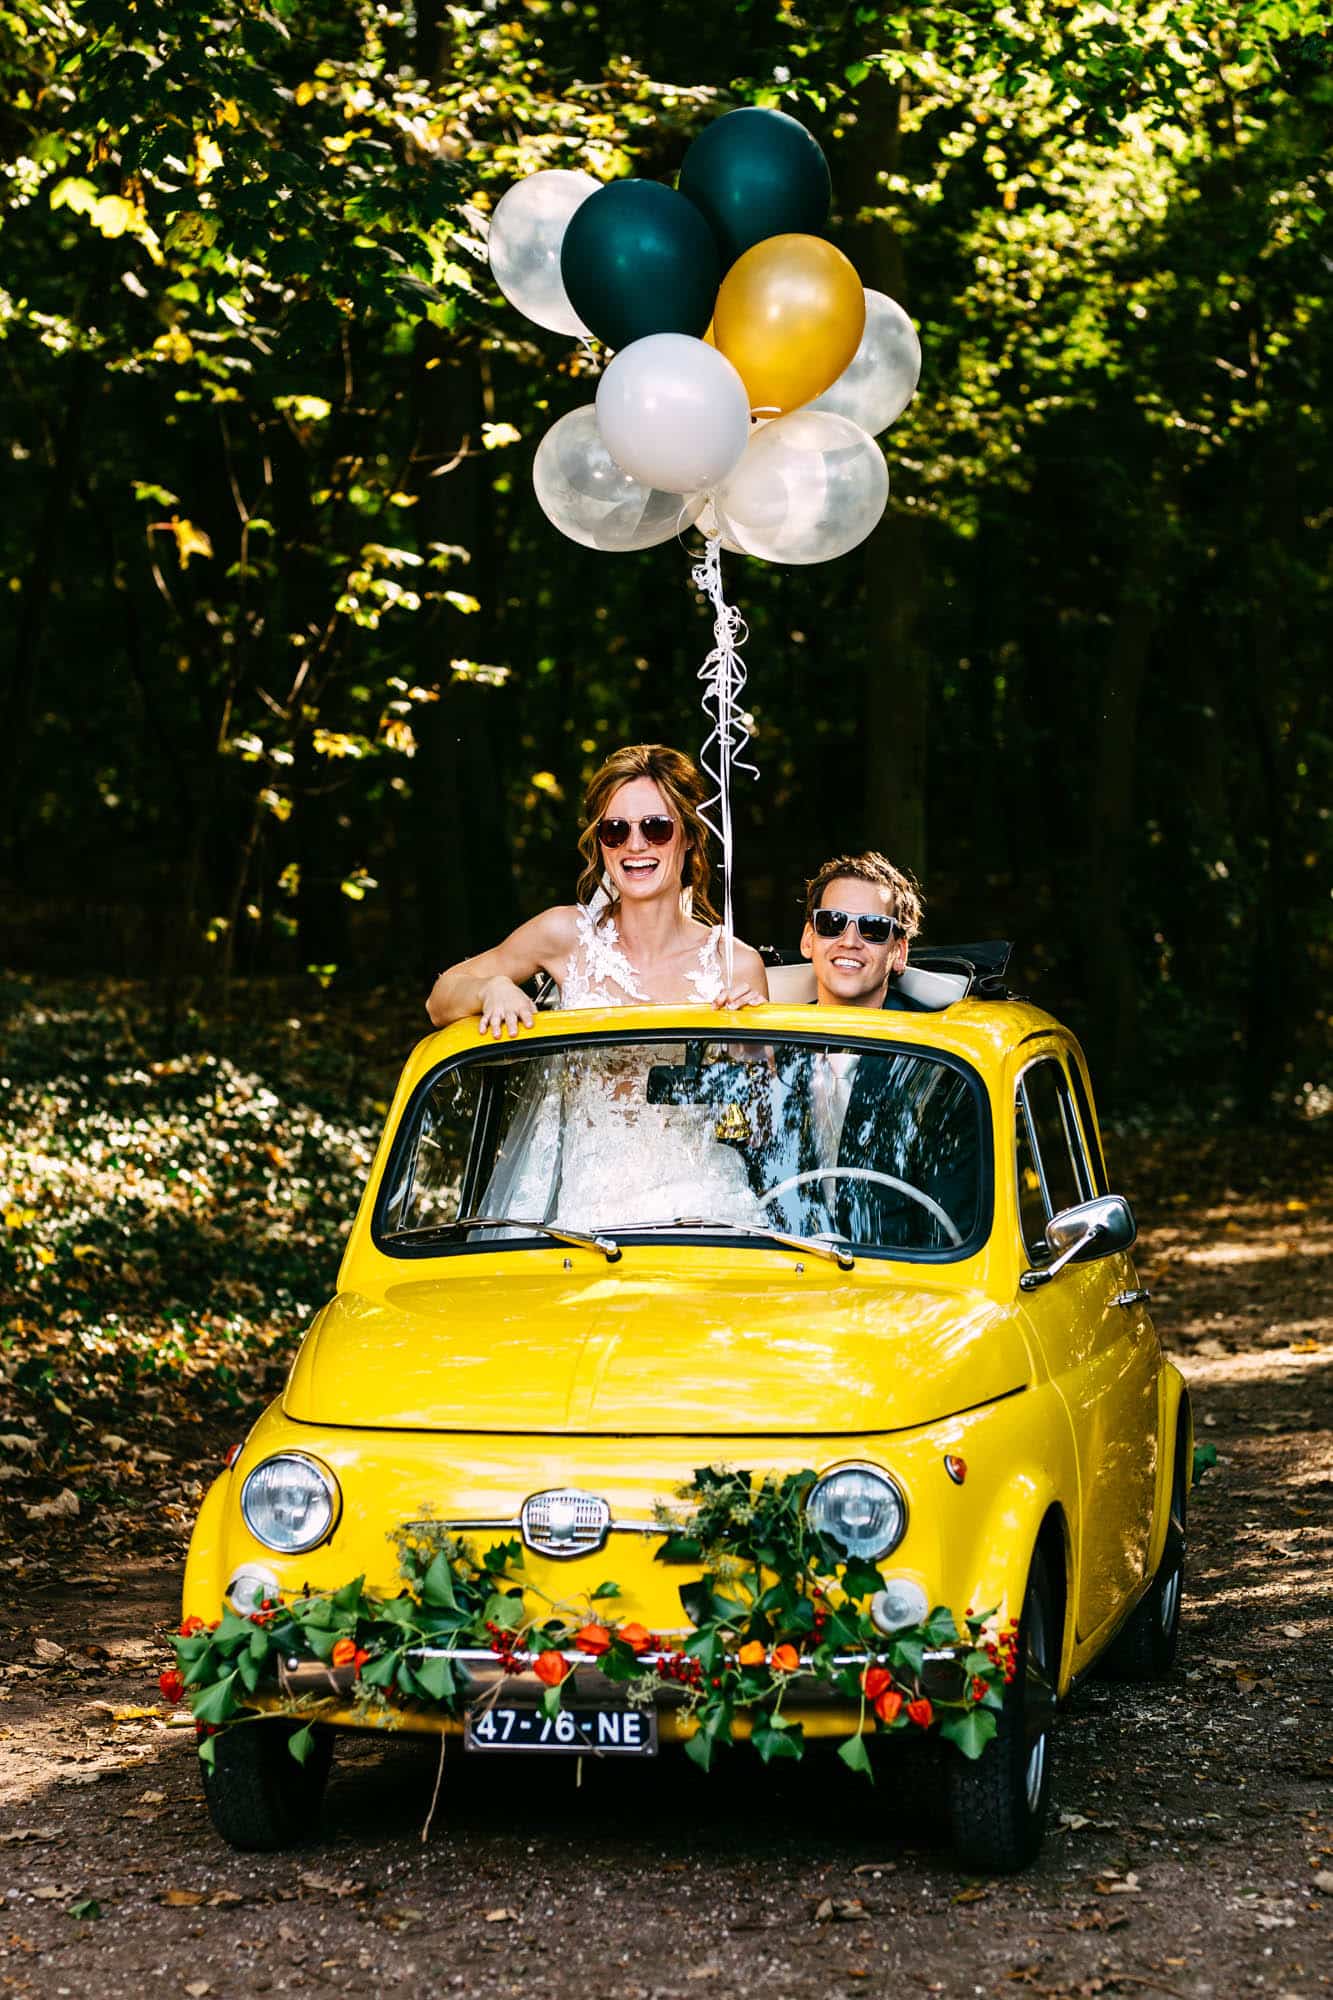 A bride and groom in a yellow car with balloons celebrate their Wedding in the forest.